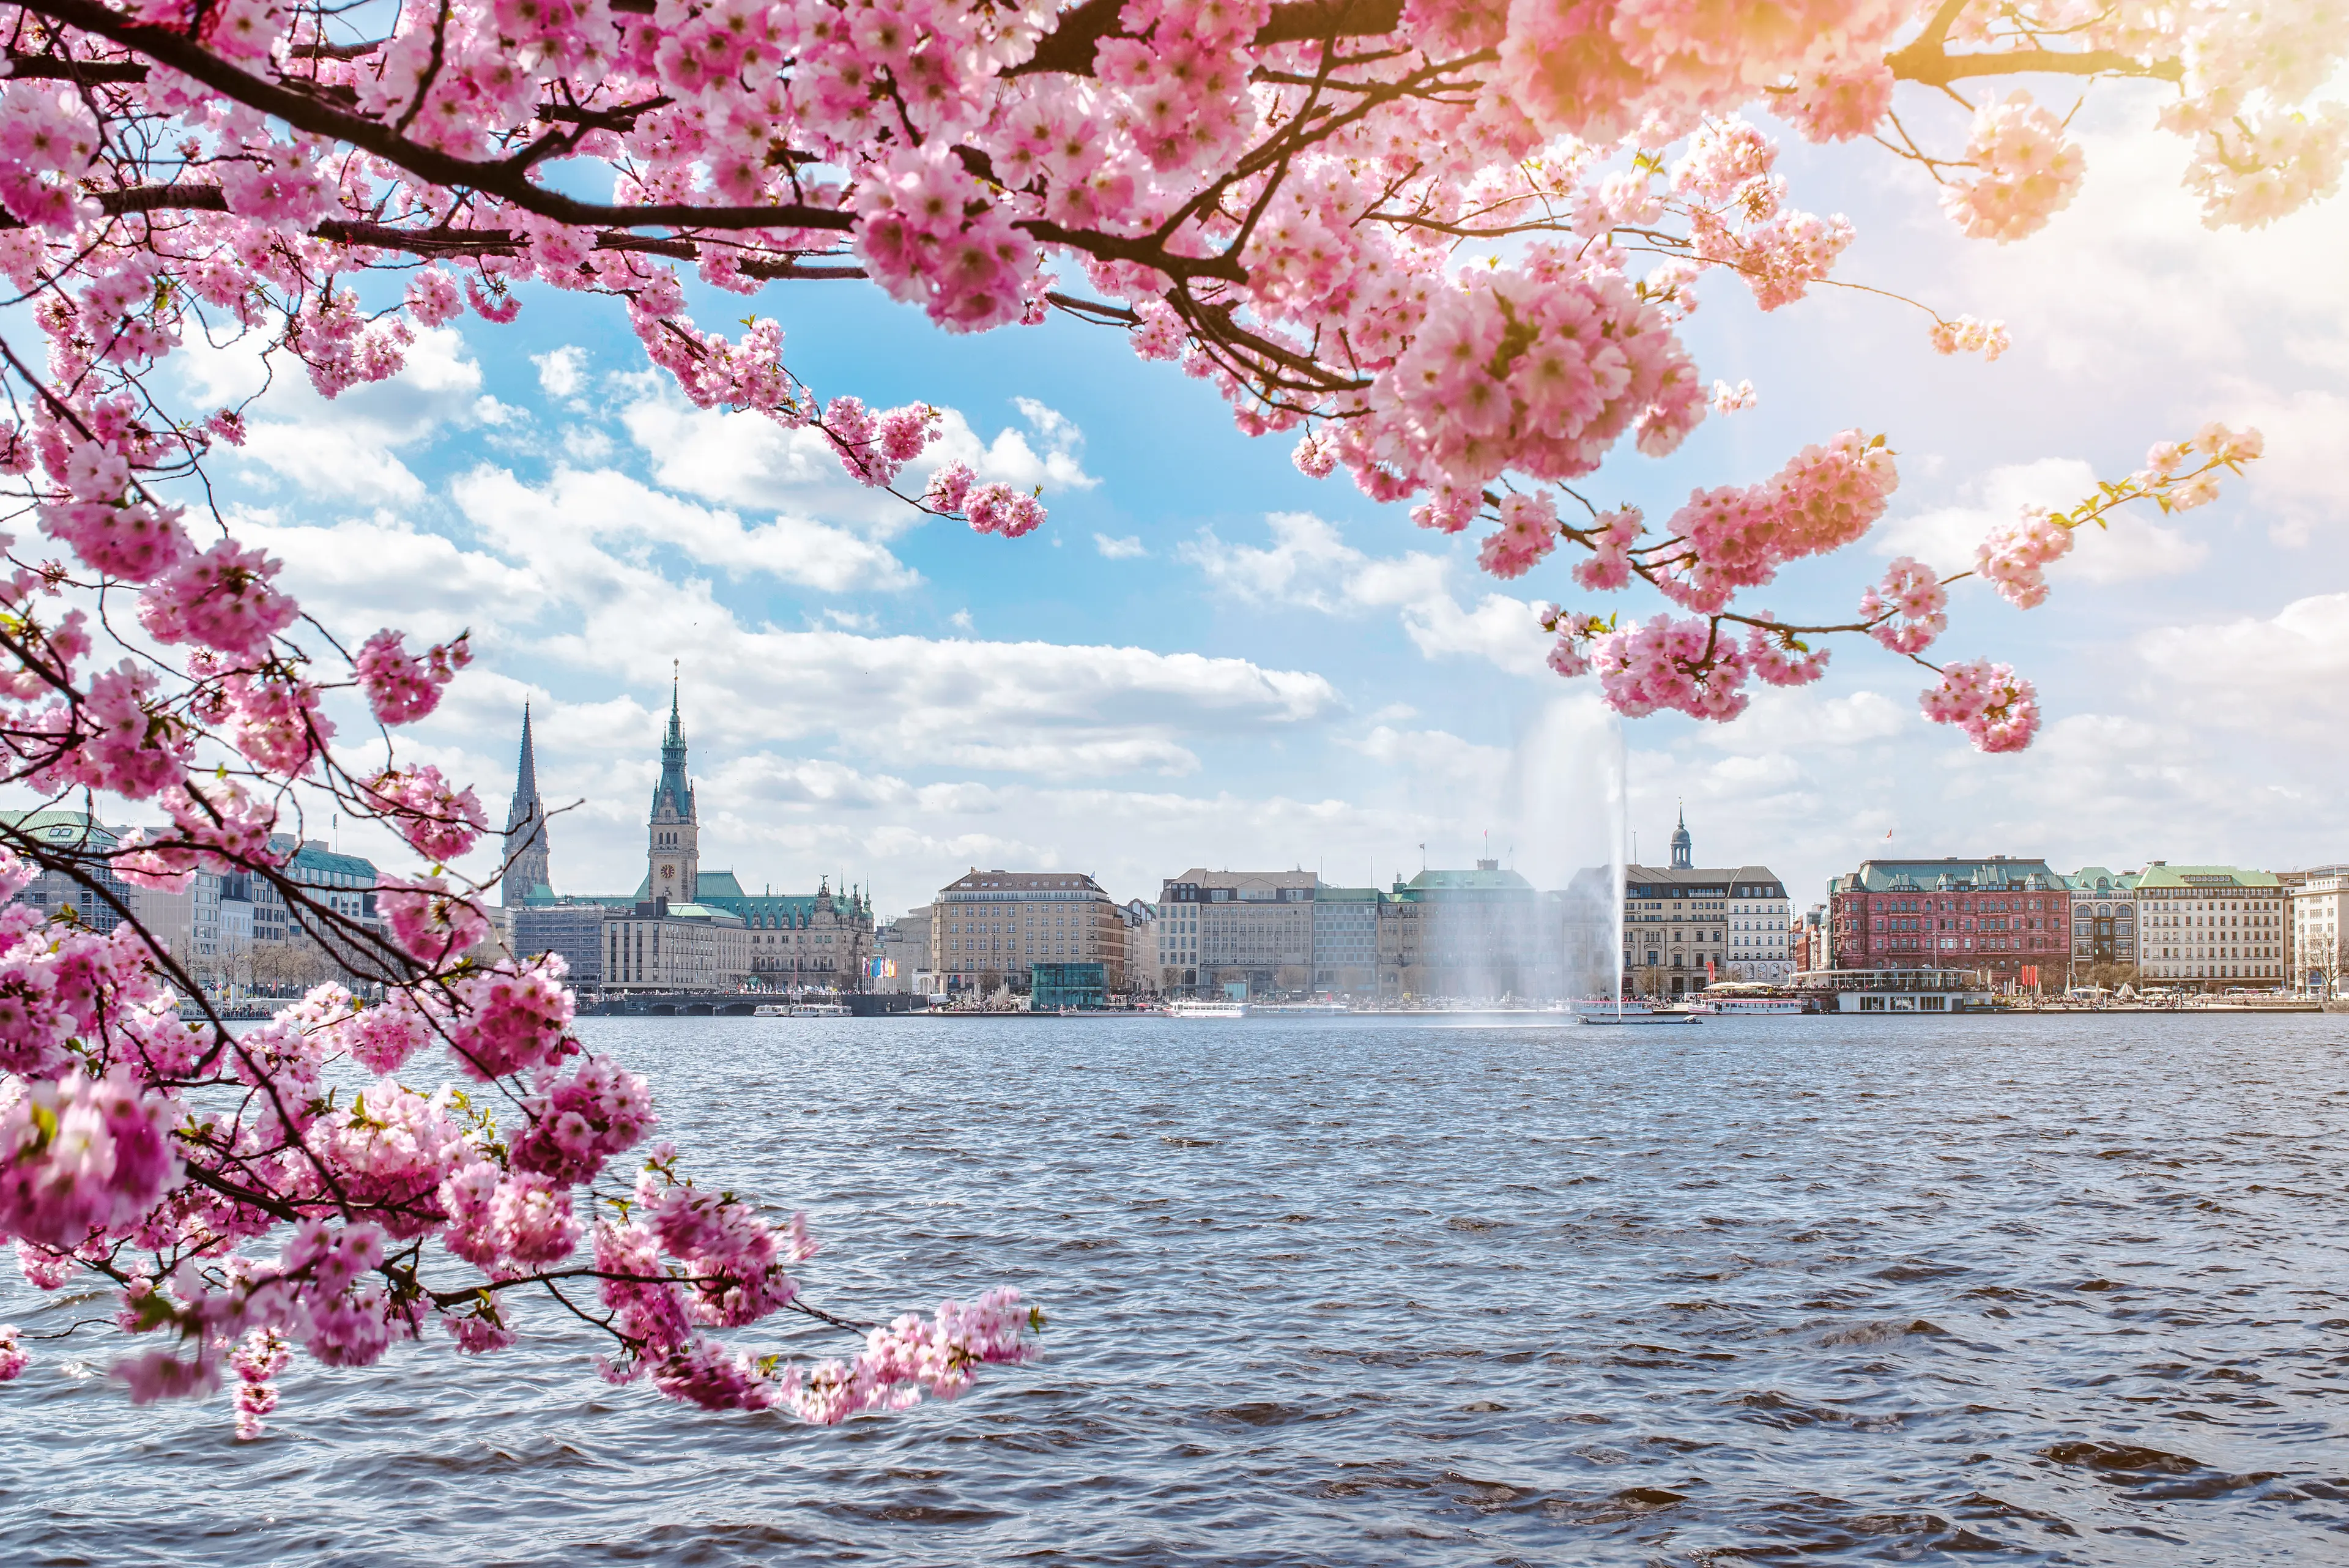 Cherry blossom tree by the Alster lake